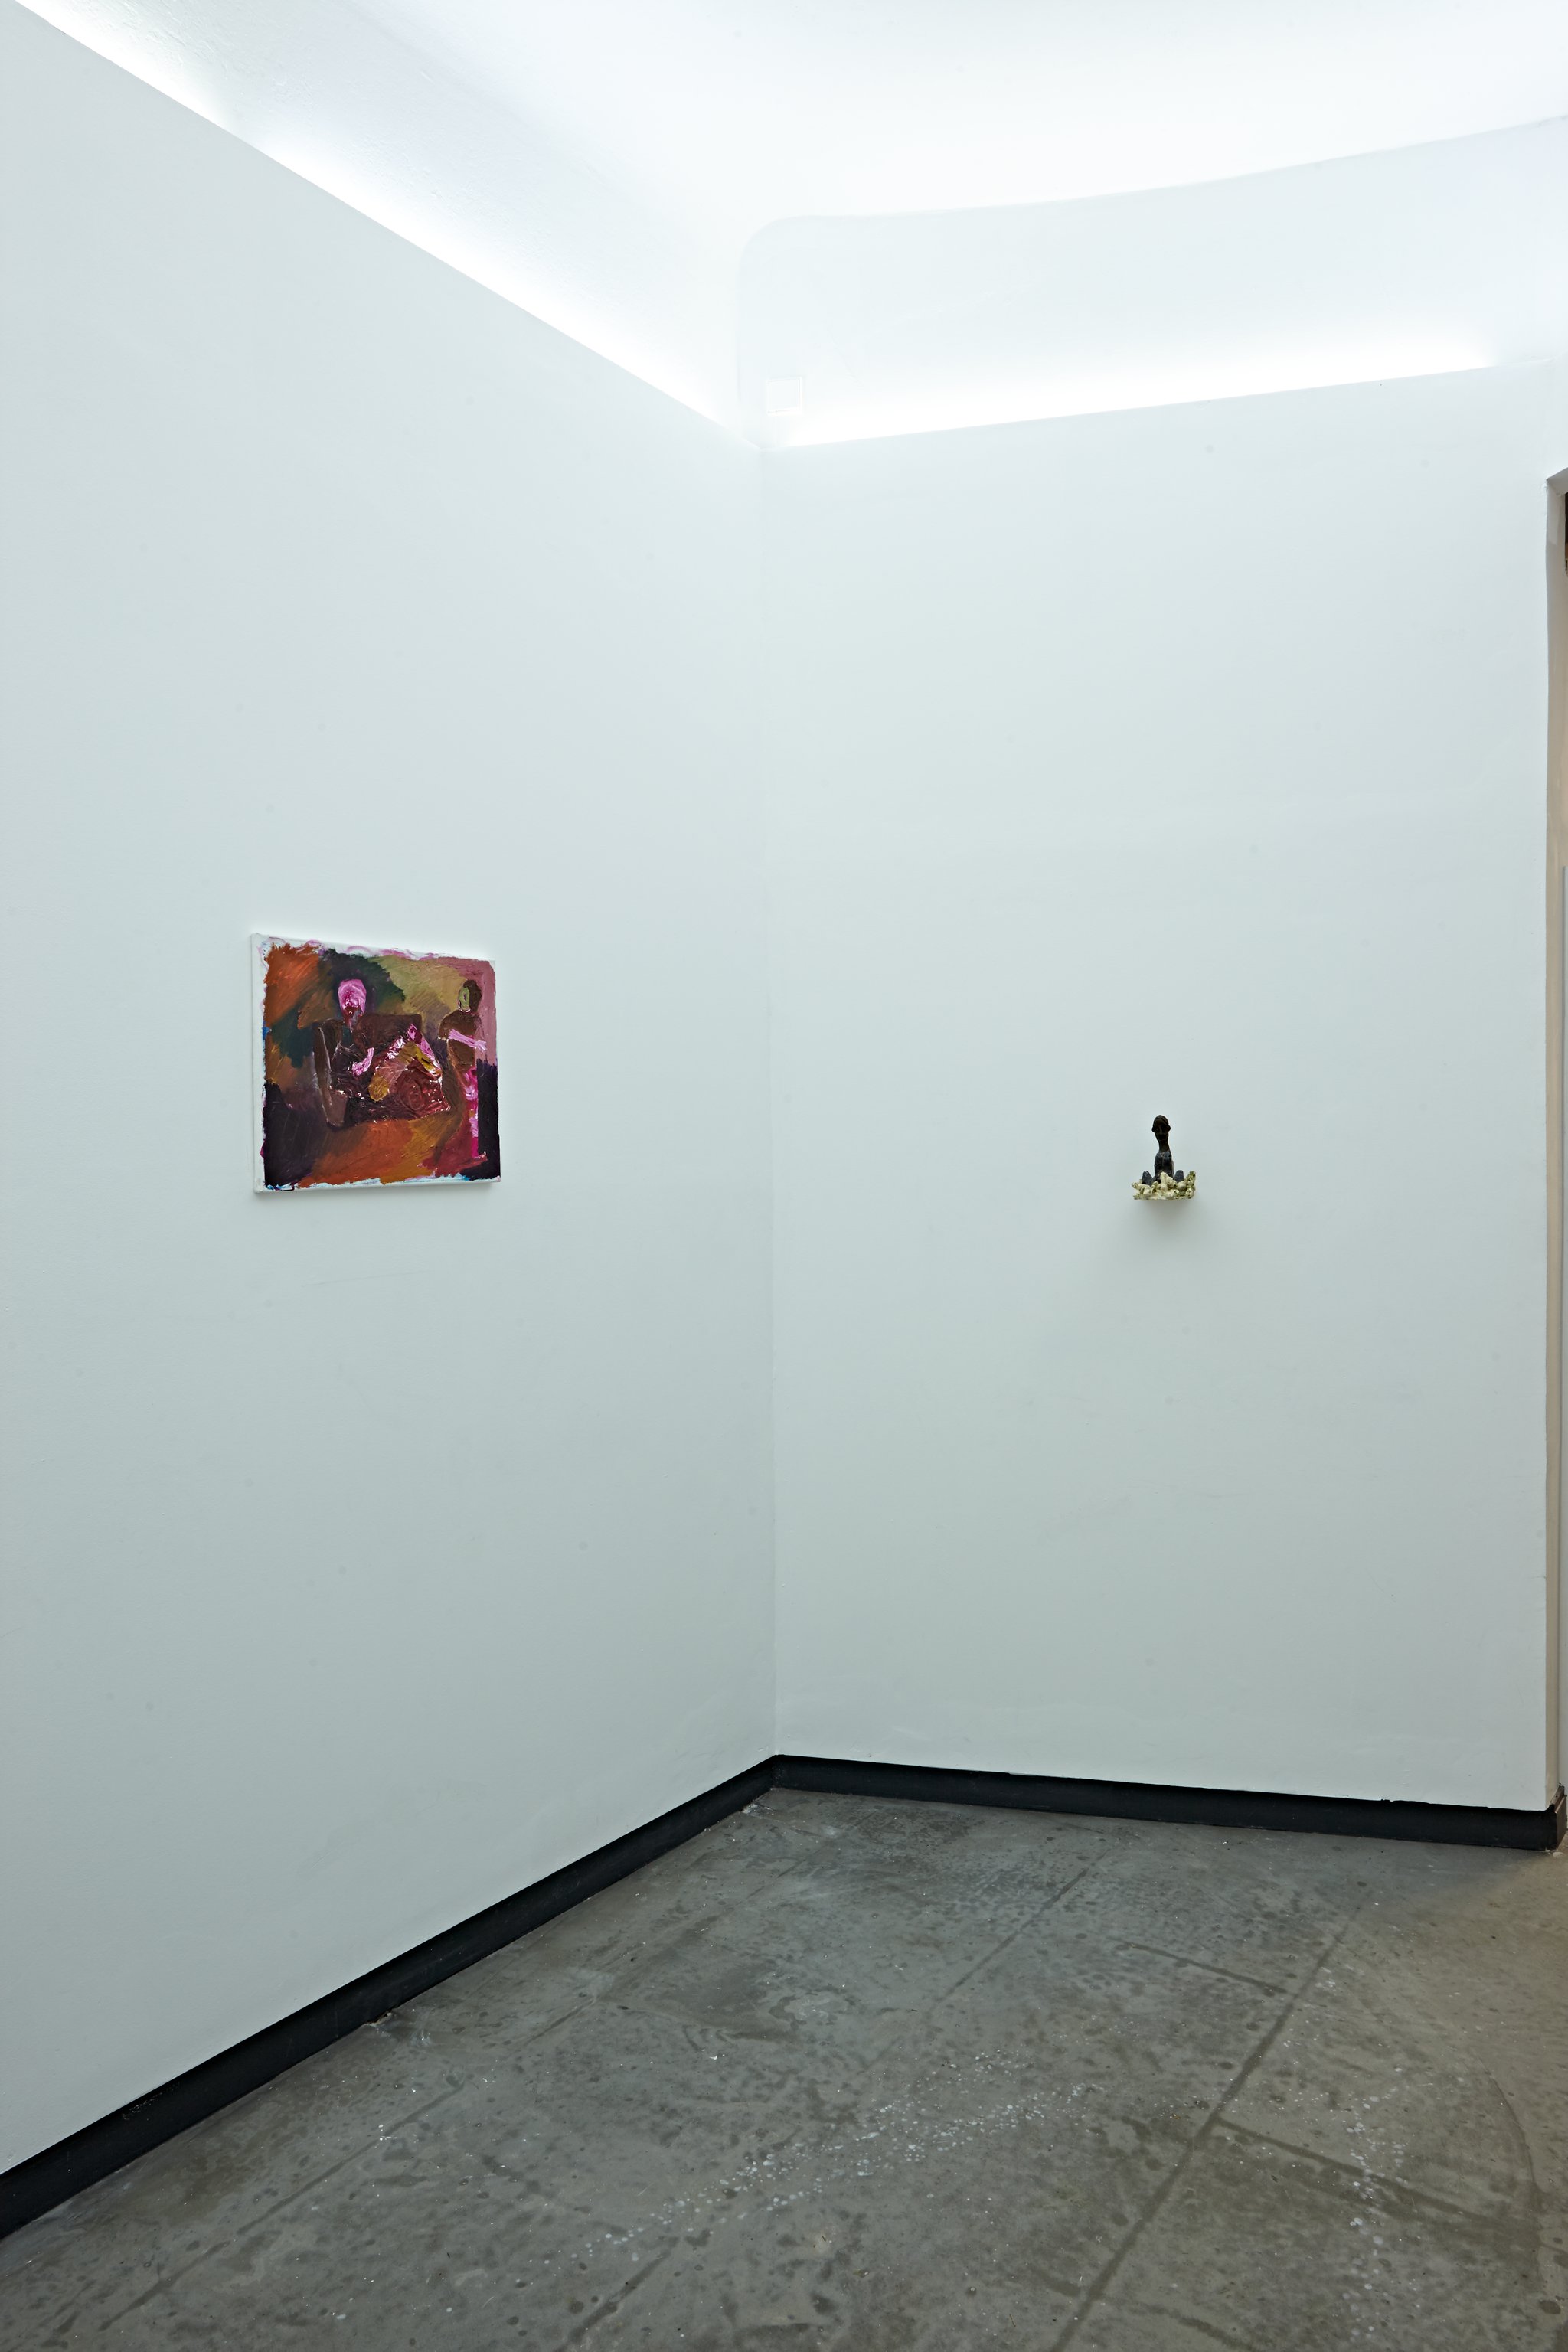 Ali Altin, Sophia Domagala, Installation views from "Stupidity Is Not Home"